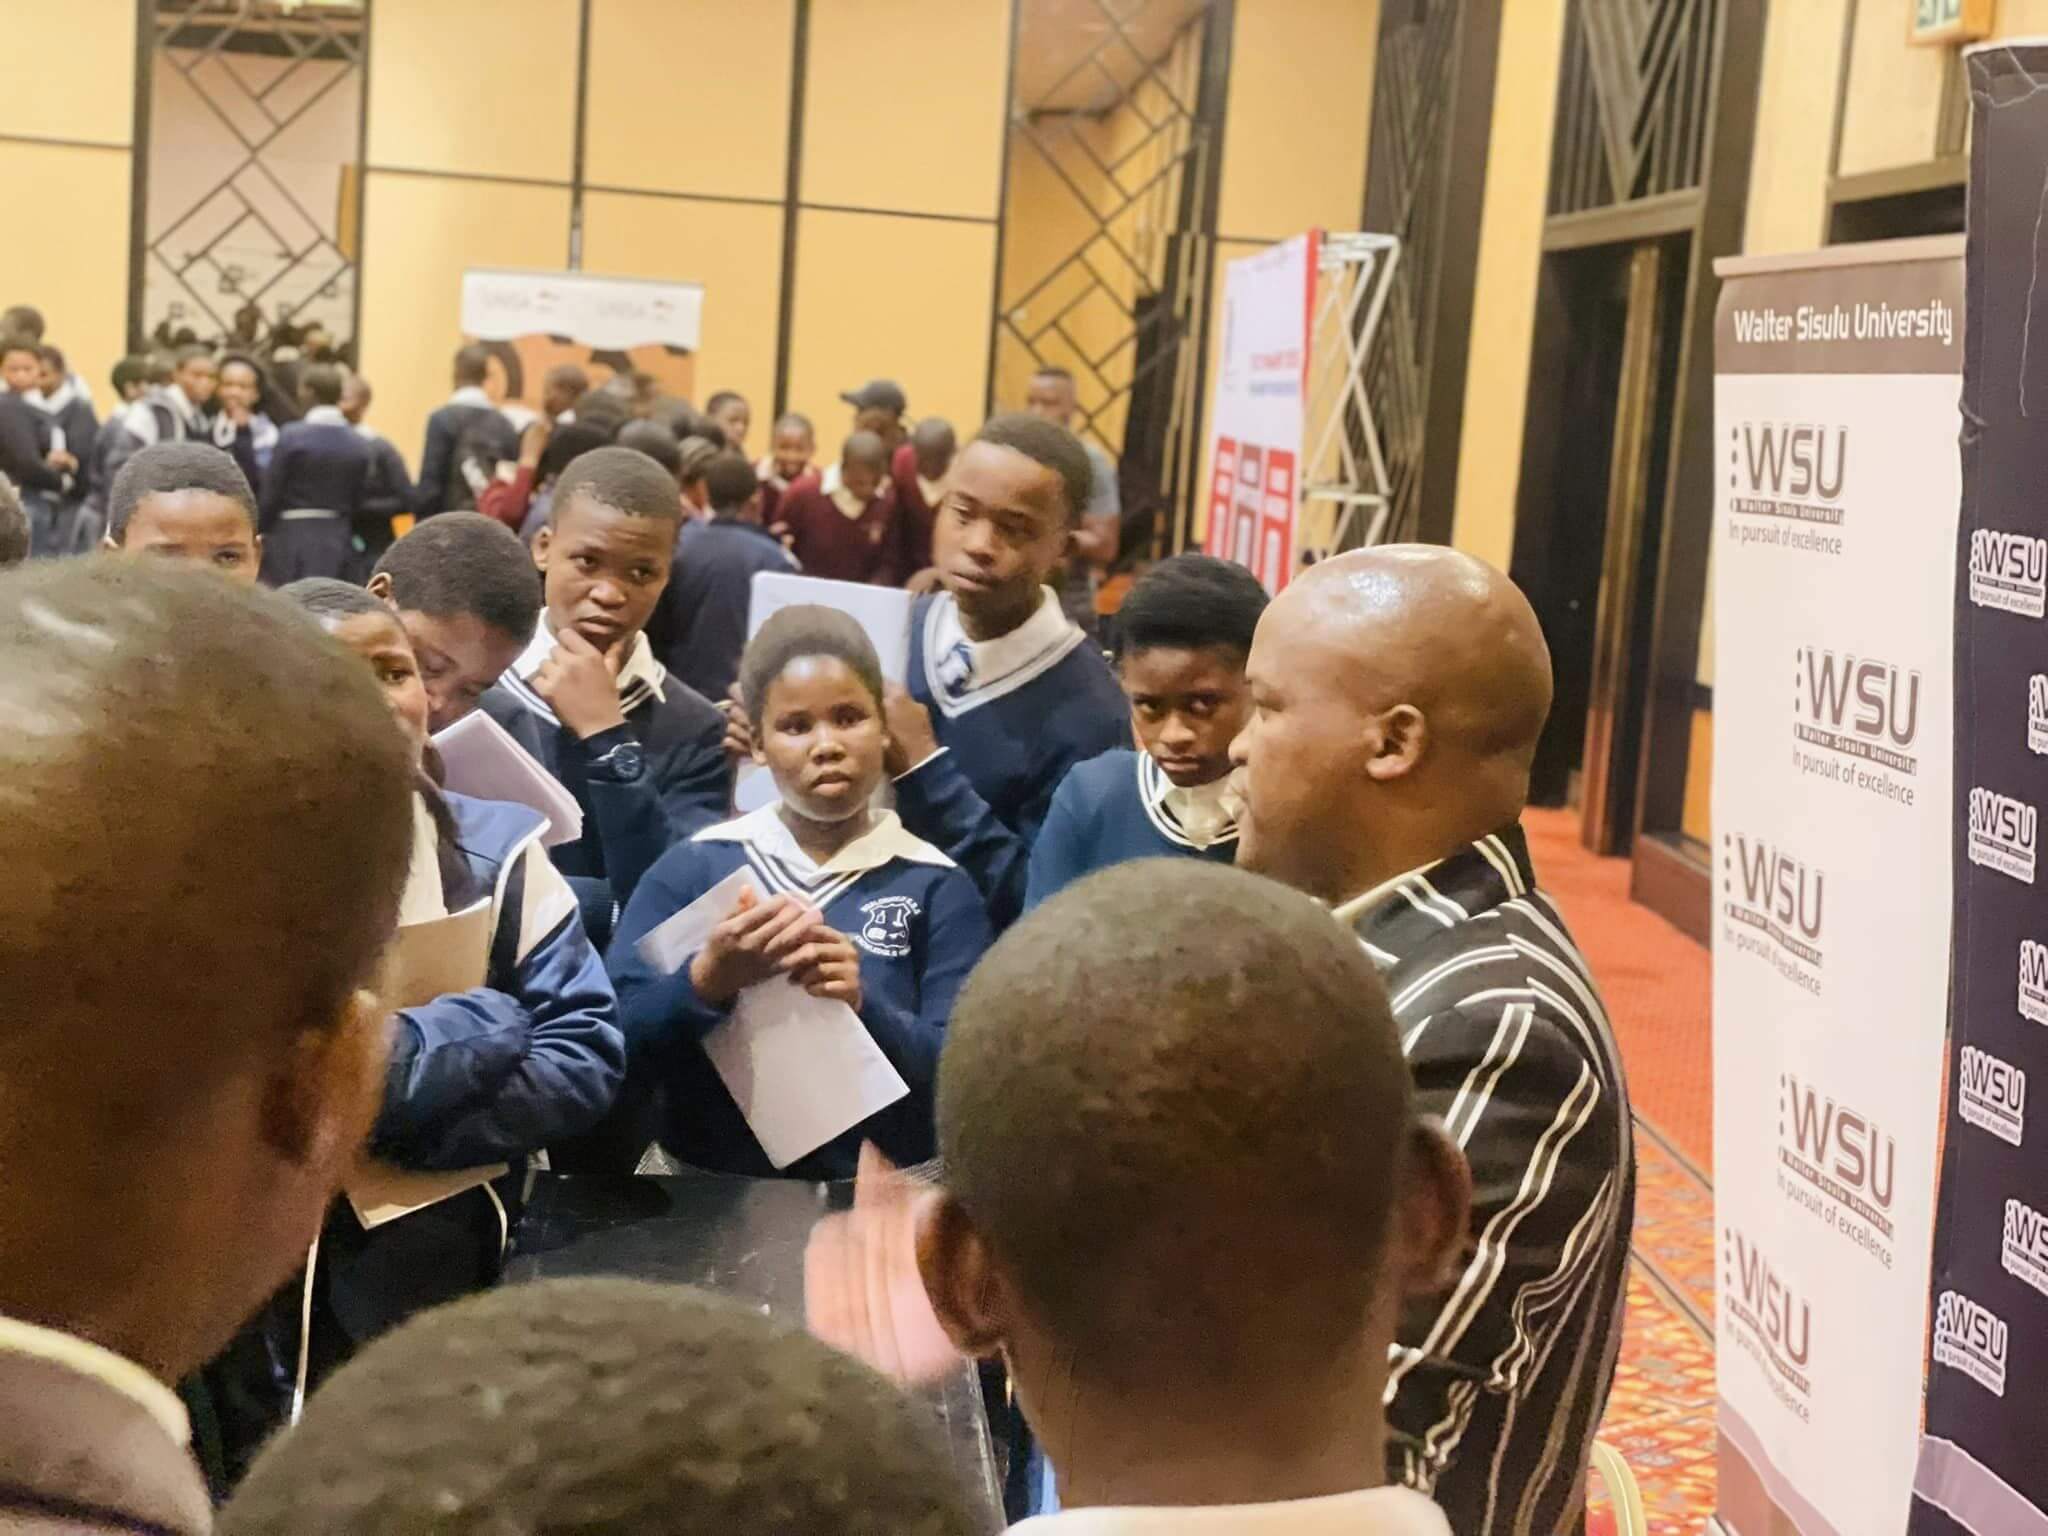 Empowering Youth Through Education: Local Municipality's Career Exhibition Cultivates Opportunities for the Class of 2024